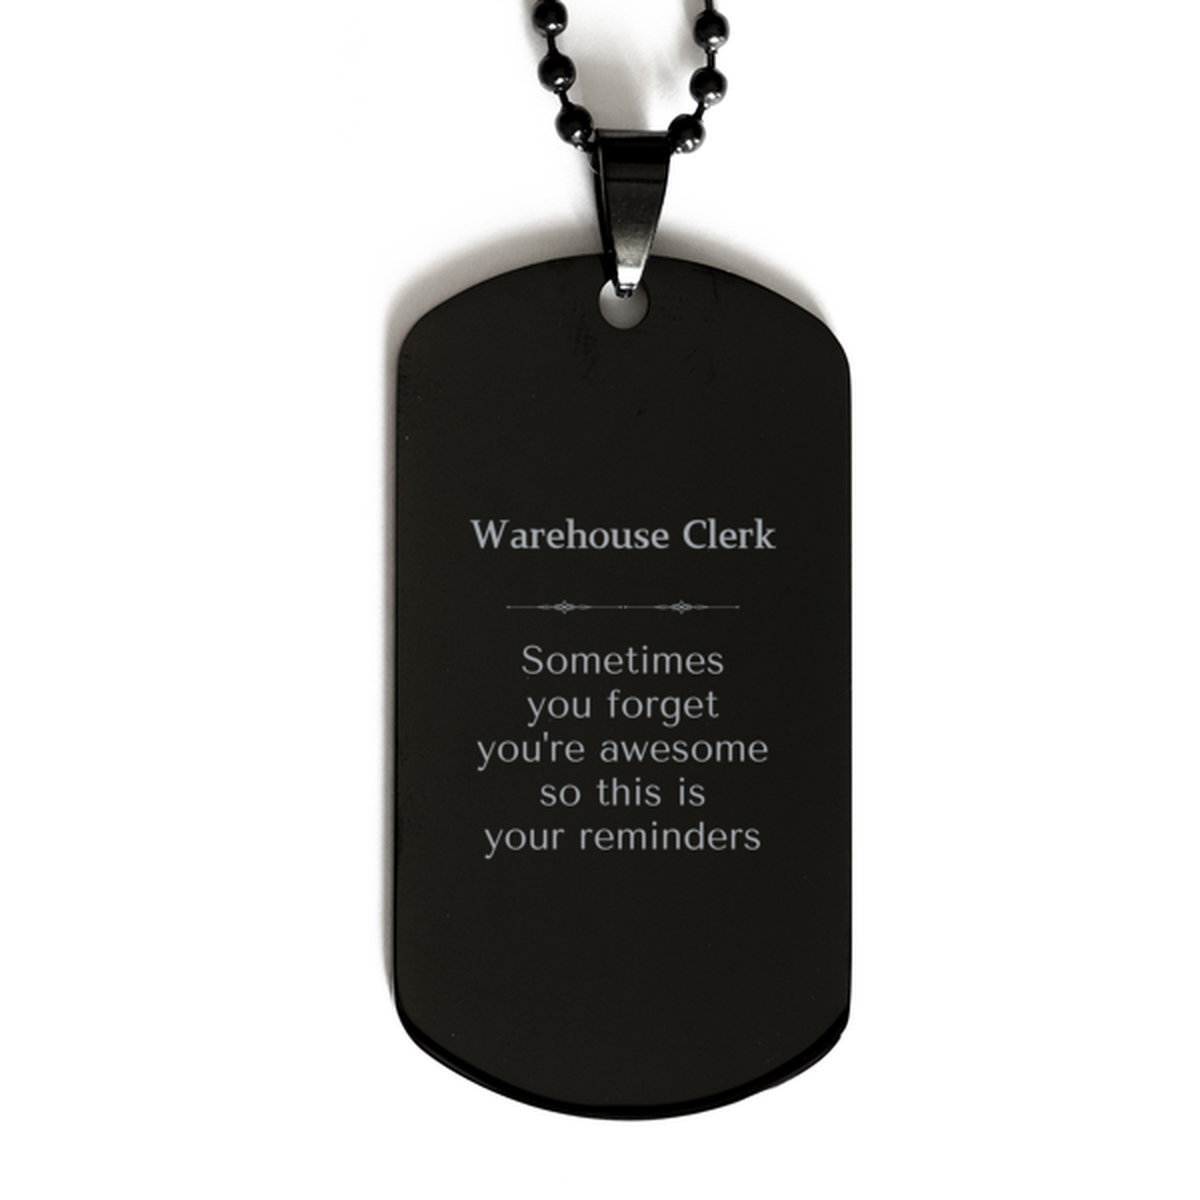 Sentimental Warehouse Clerk Black Dog Tag, Warehouse Clerk Sometimes you forget you're awesome so this is your reminders, Graduation Christmas Birthday Gifts for Warehouse Clerk, Men, Women, Coworkers